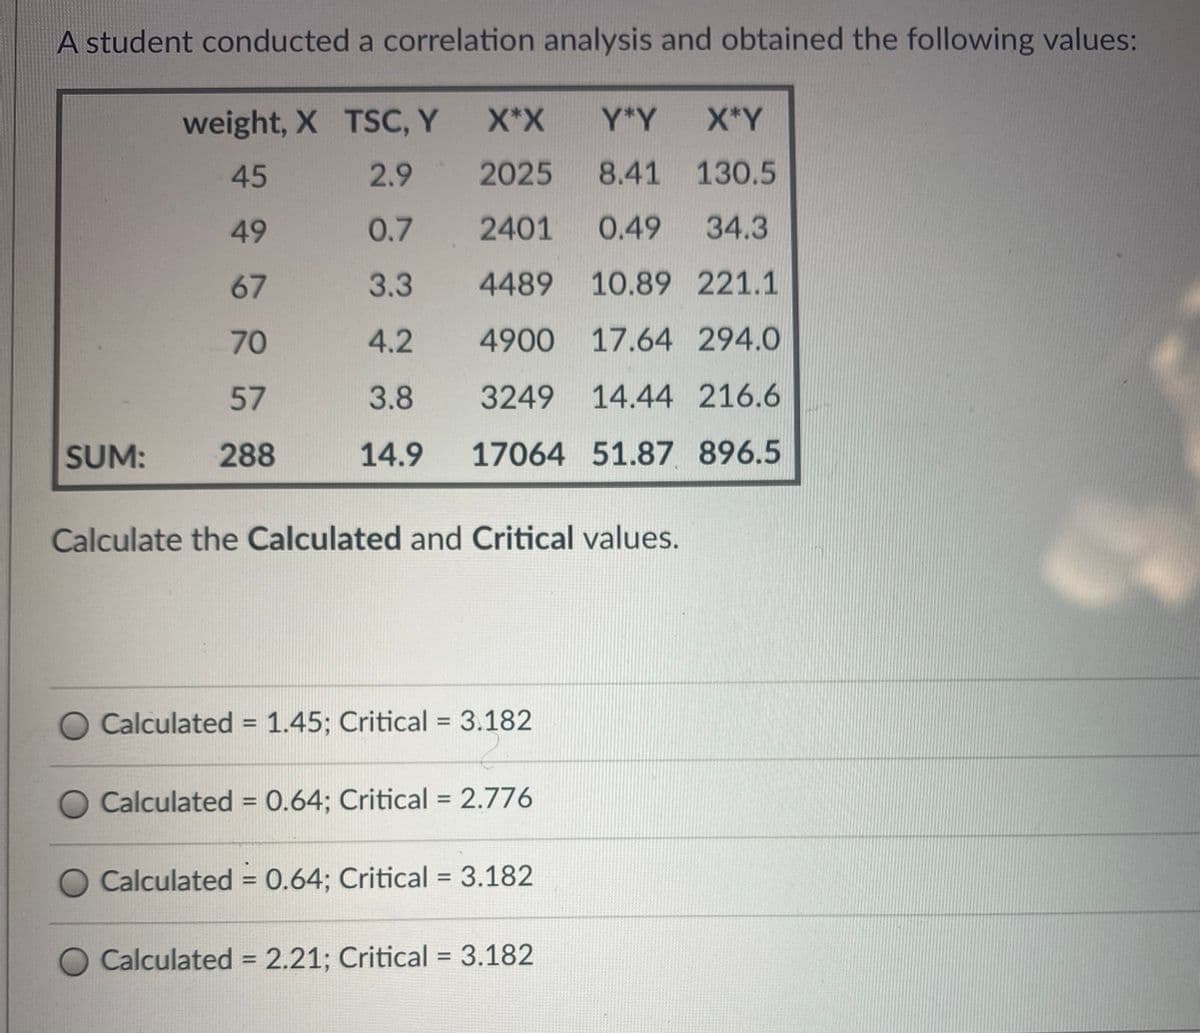 A student conducted a correlation analysis and obtained the following values:
weight, X TSC, Y X*X
Y*Y
X*Y
45
2.9
2025
8.41 130.5
49
0.7
2401
0.49
34.3
67
3.3
4489
10.89 221.1
70
4.2
4900 17.64 294.0
57
3.8
3249 14.44 216.6
SUM:
288
14.9
17064 51.87 896.5
Calculate the Calculated and Critical values.
Calculated = 1.45; Critical = 3.182
%3D
Calculated = 0.64; Critical = 2.776
%3D
Calculated = 0.64; Critical = 3.182
%3D
Calculated = 2.21; Critical = 3.182
%3D
%3D
